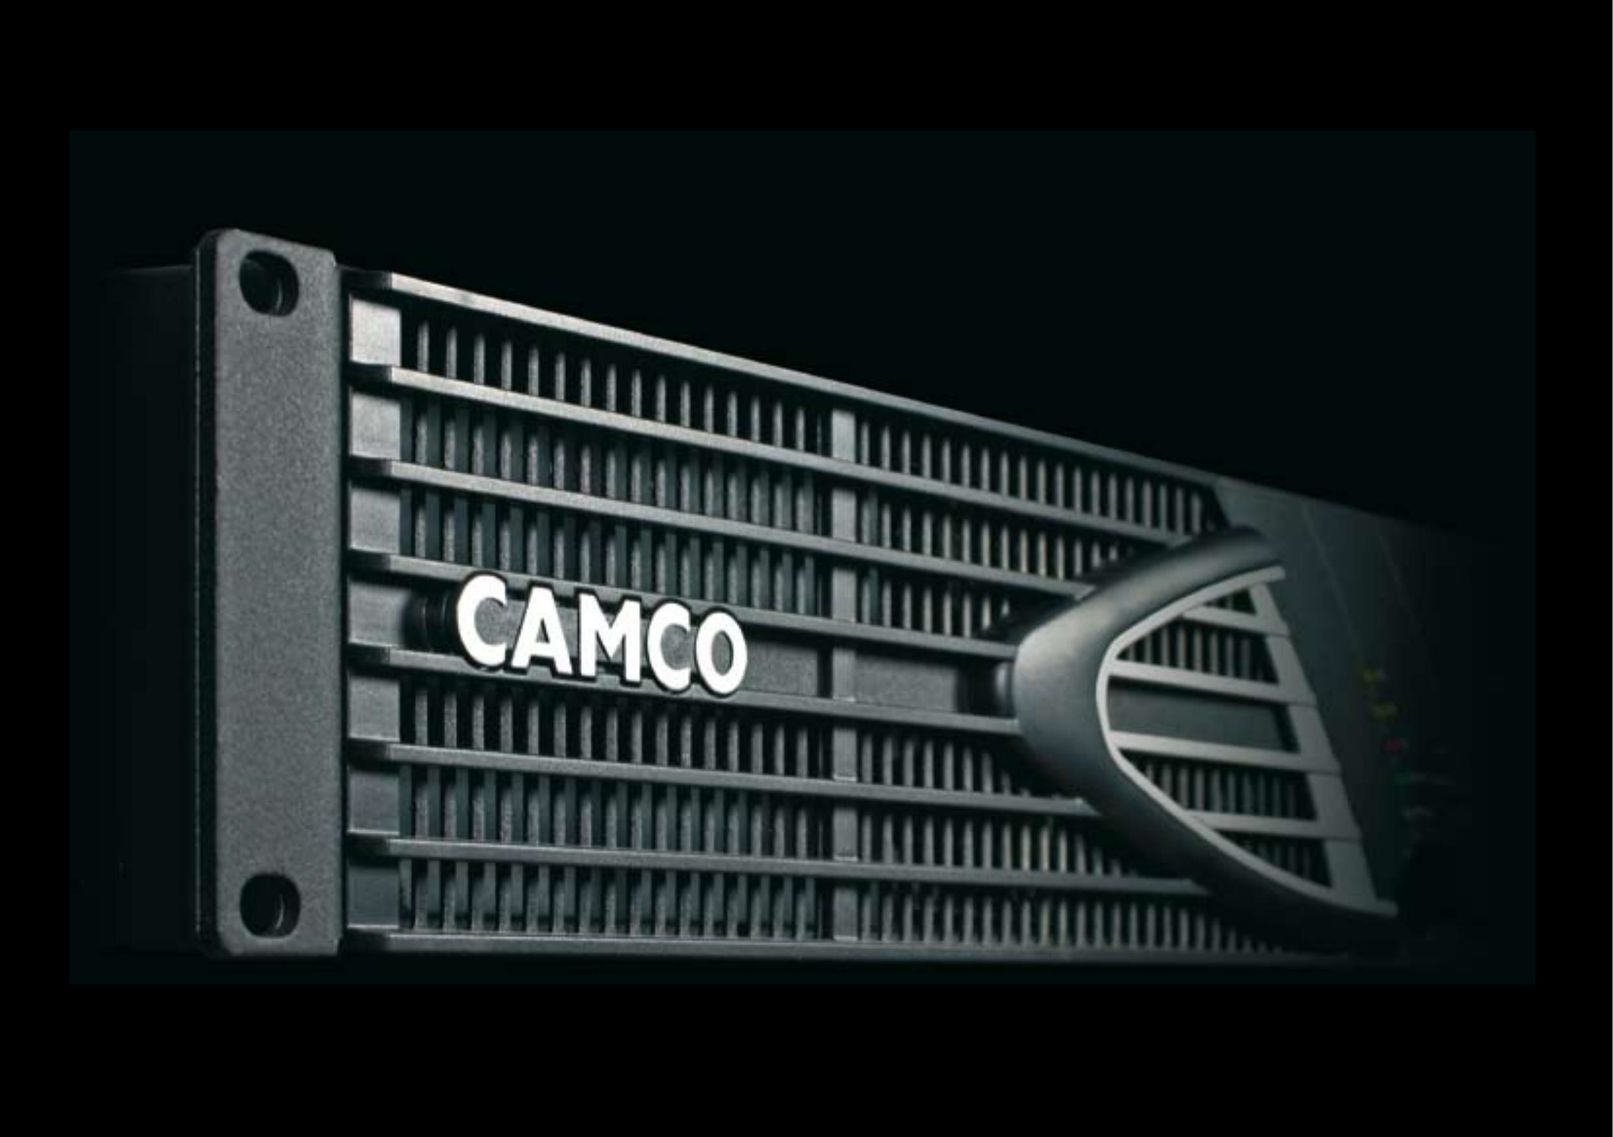 Camco P.5 Series Stereo Amplifier User Manual